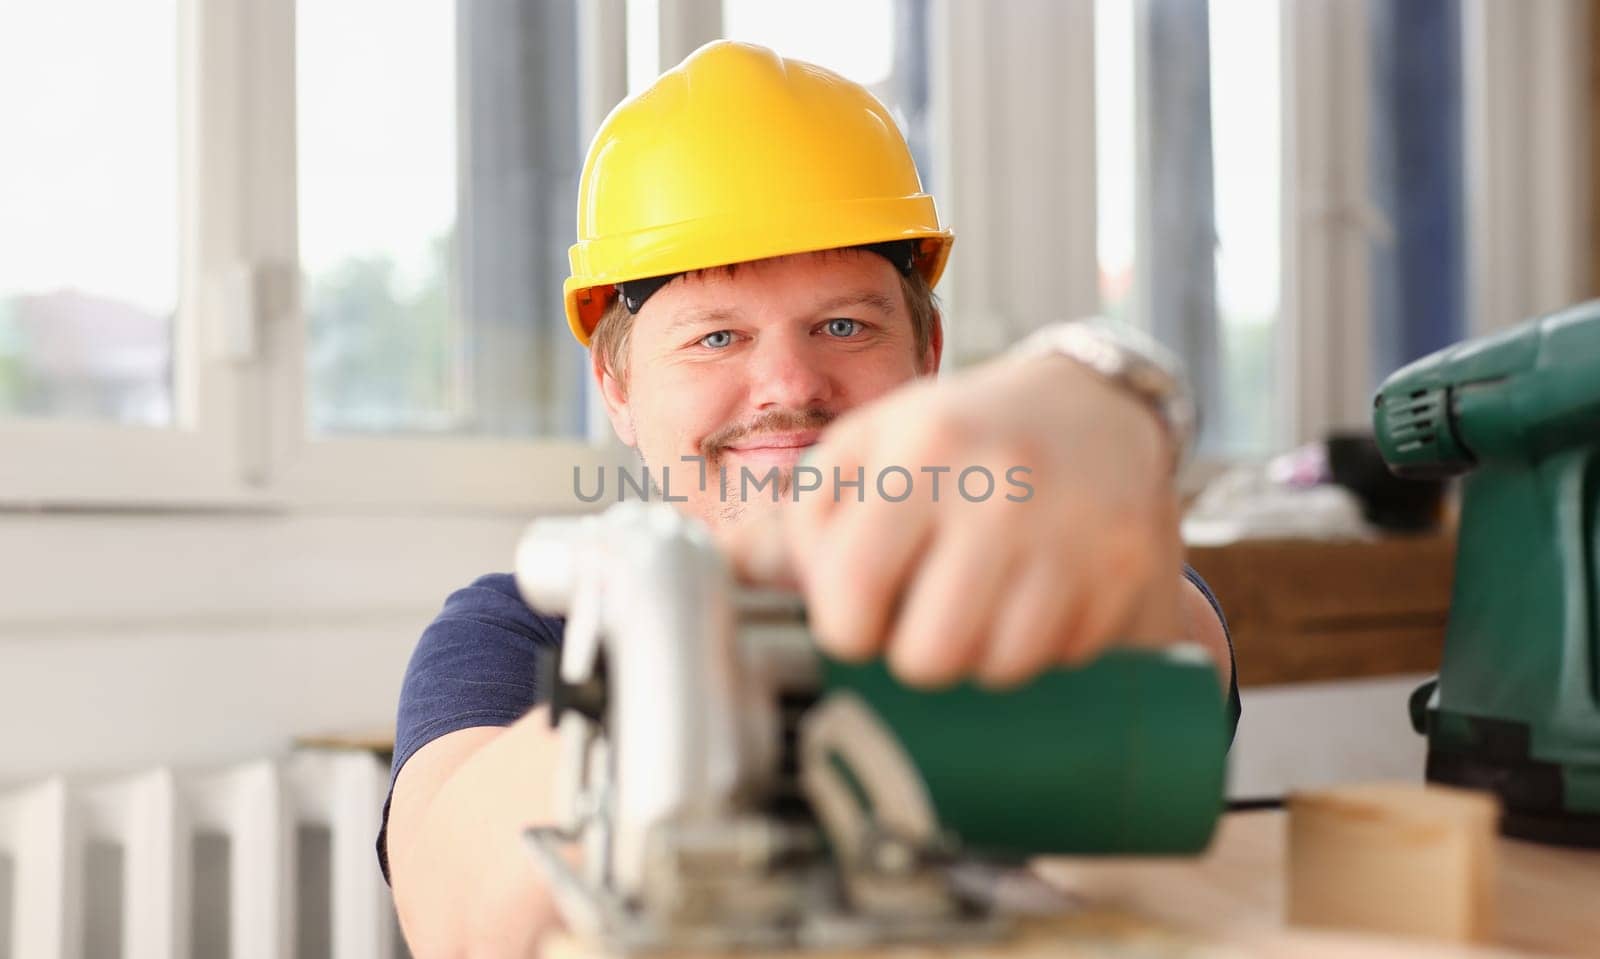 Worker using electric saw portrait. Manual job workplace DIY inspiration improvement fix shop yellow helmet hard hat joinery startup idea industrial education profession career concept